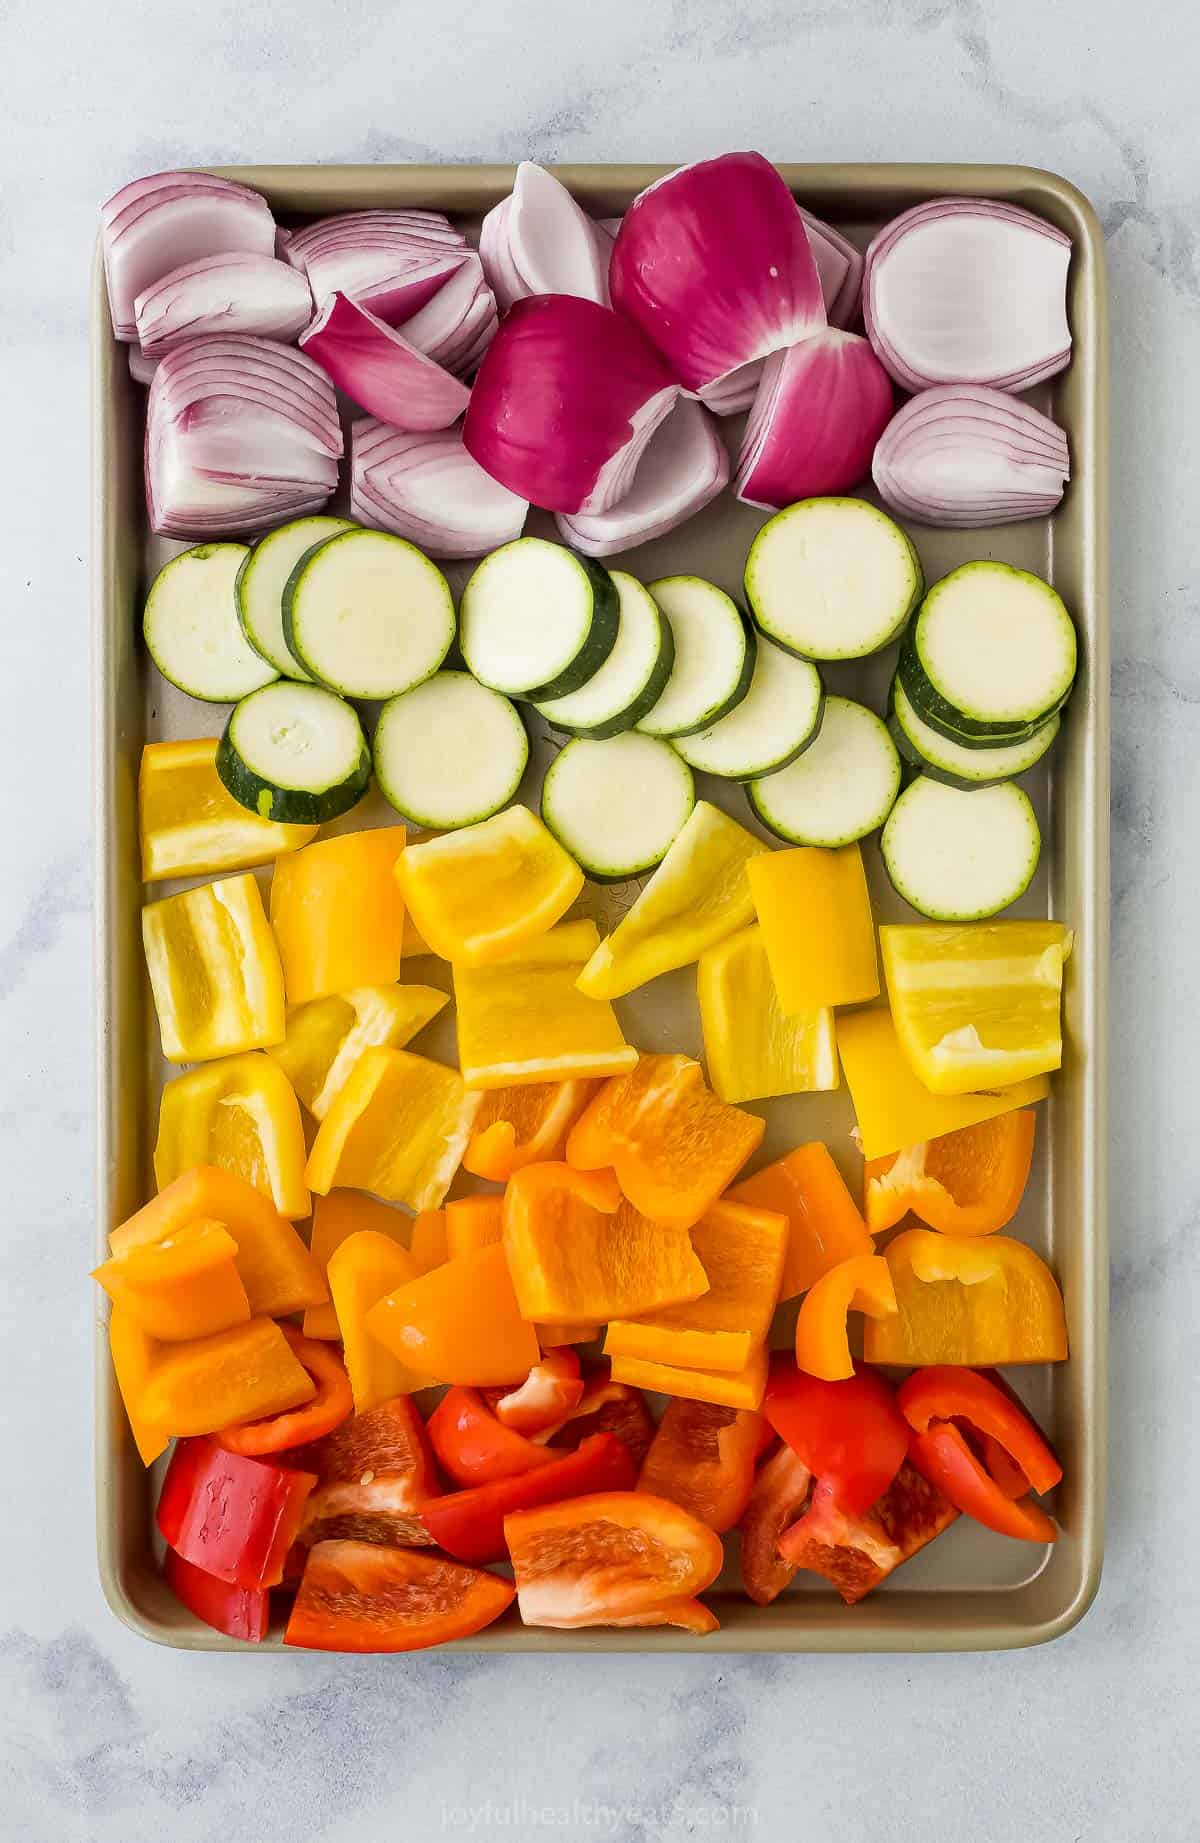 Chopped peppers on a baking sheet with quartered red onions and zucchini coins